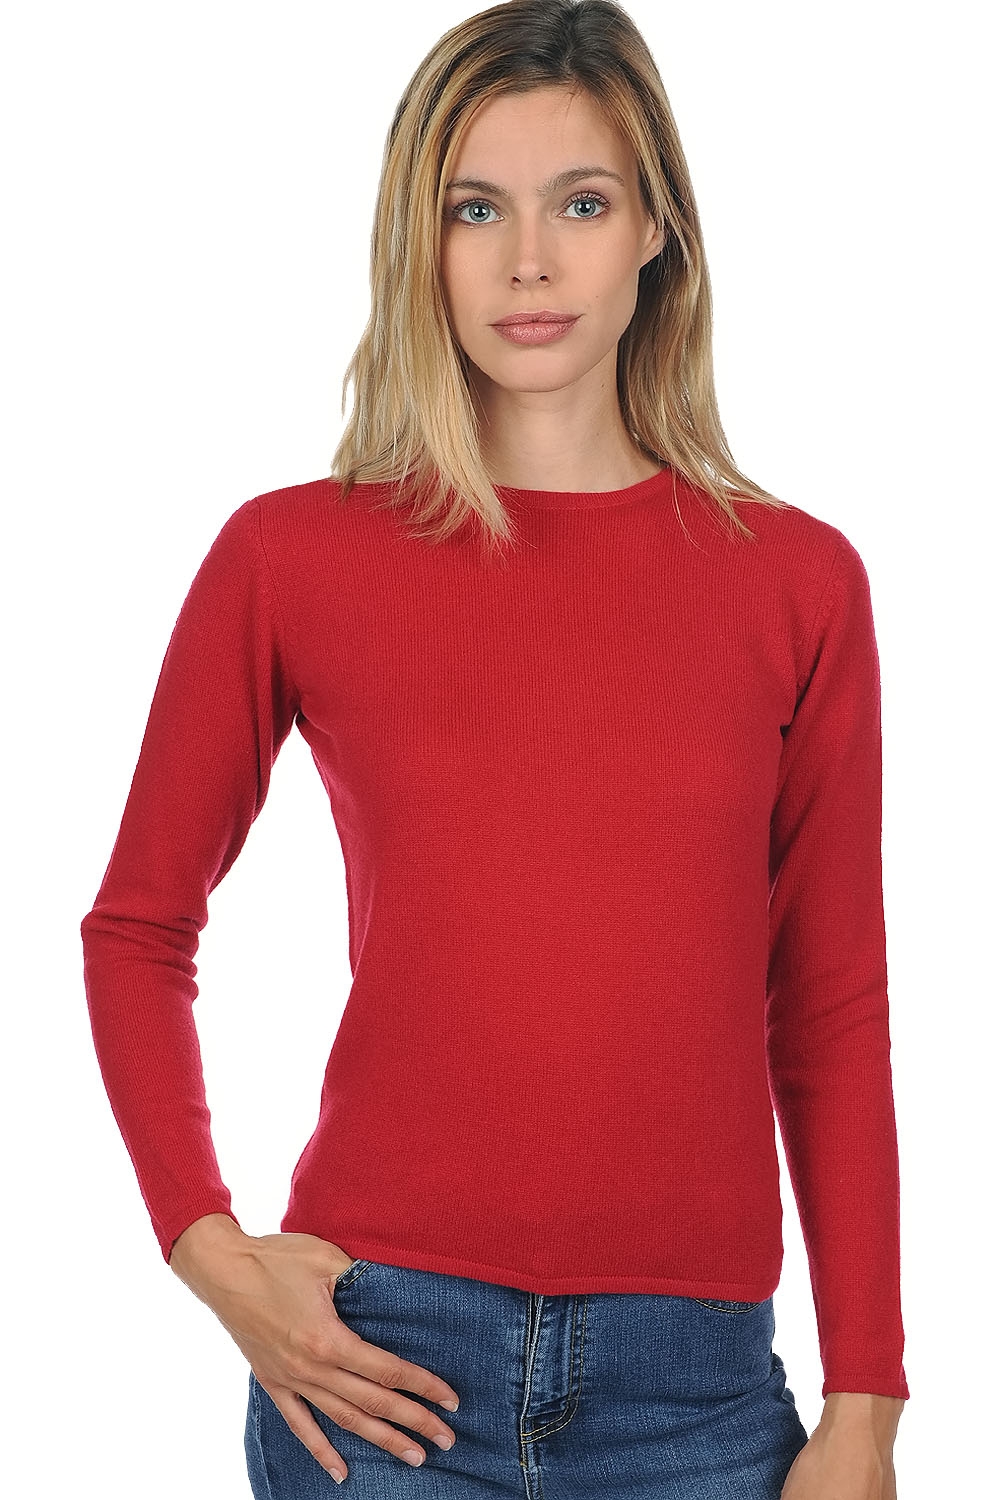 Cashmere ladies timeless classics line blood red 2xl